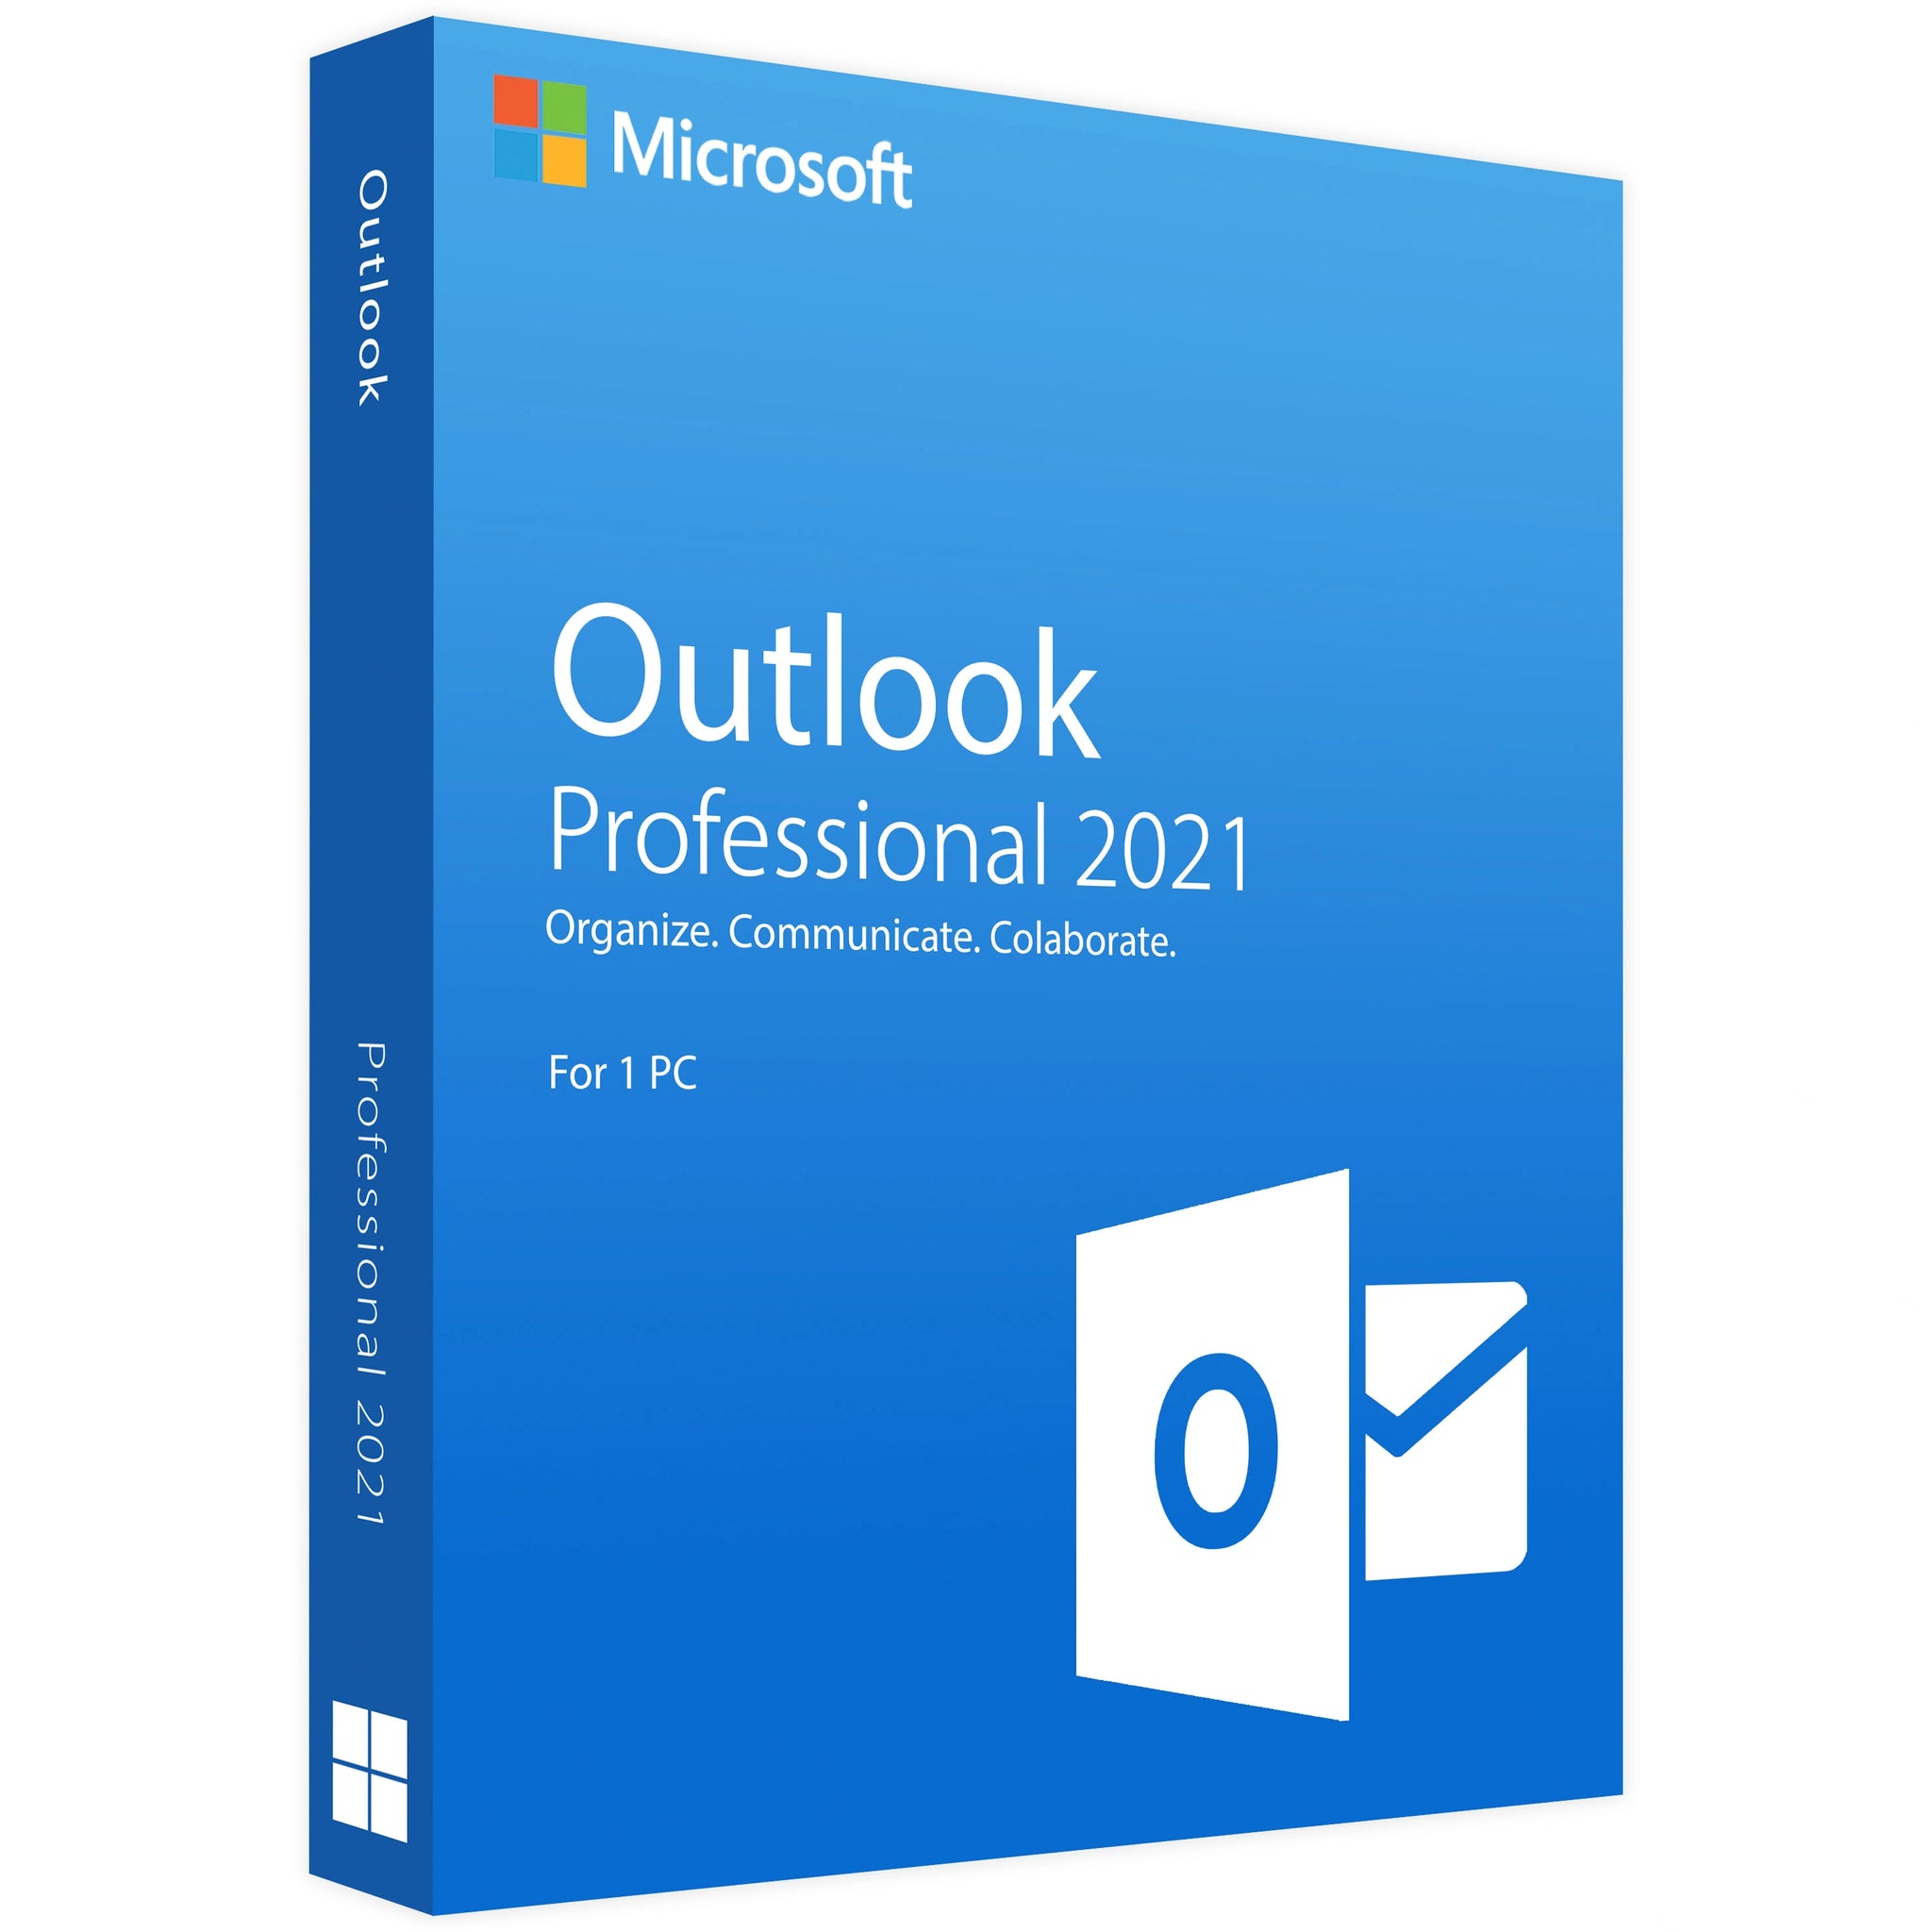 Microsoft Outlook 2021 Professional- Lifetime License Key for 1 PC